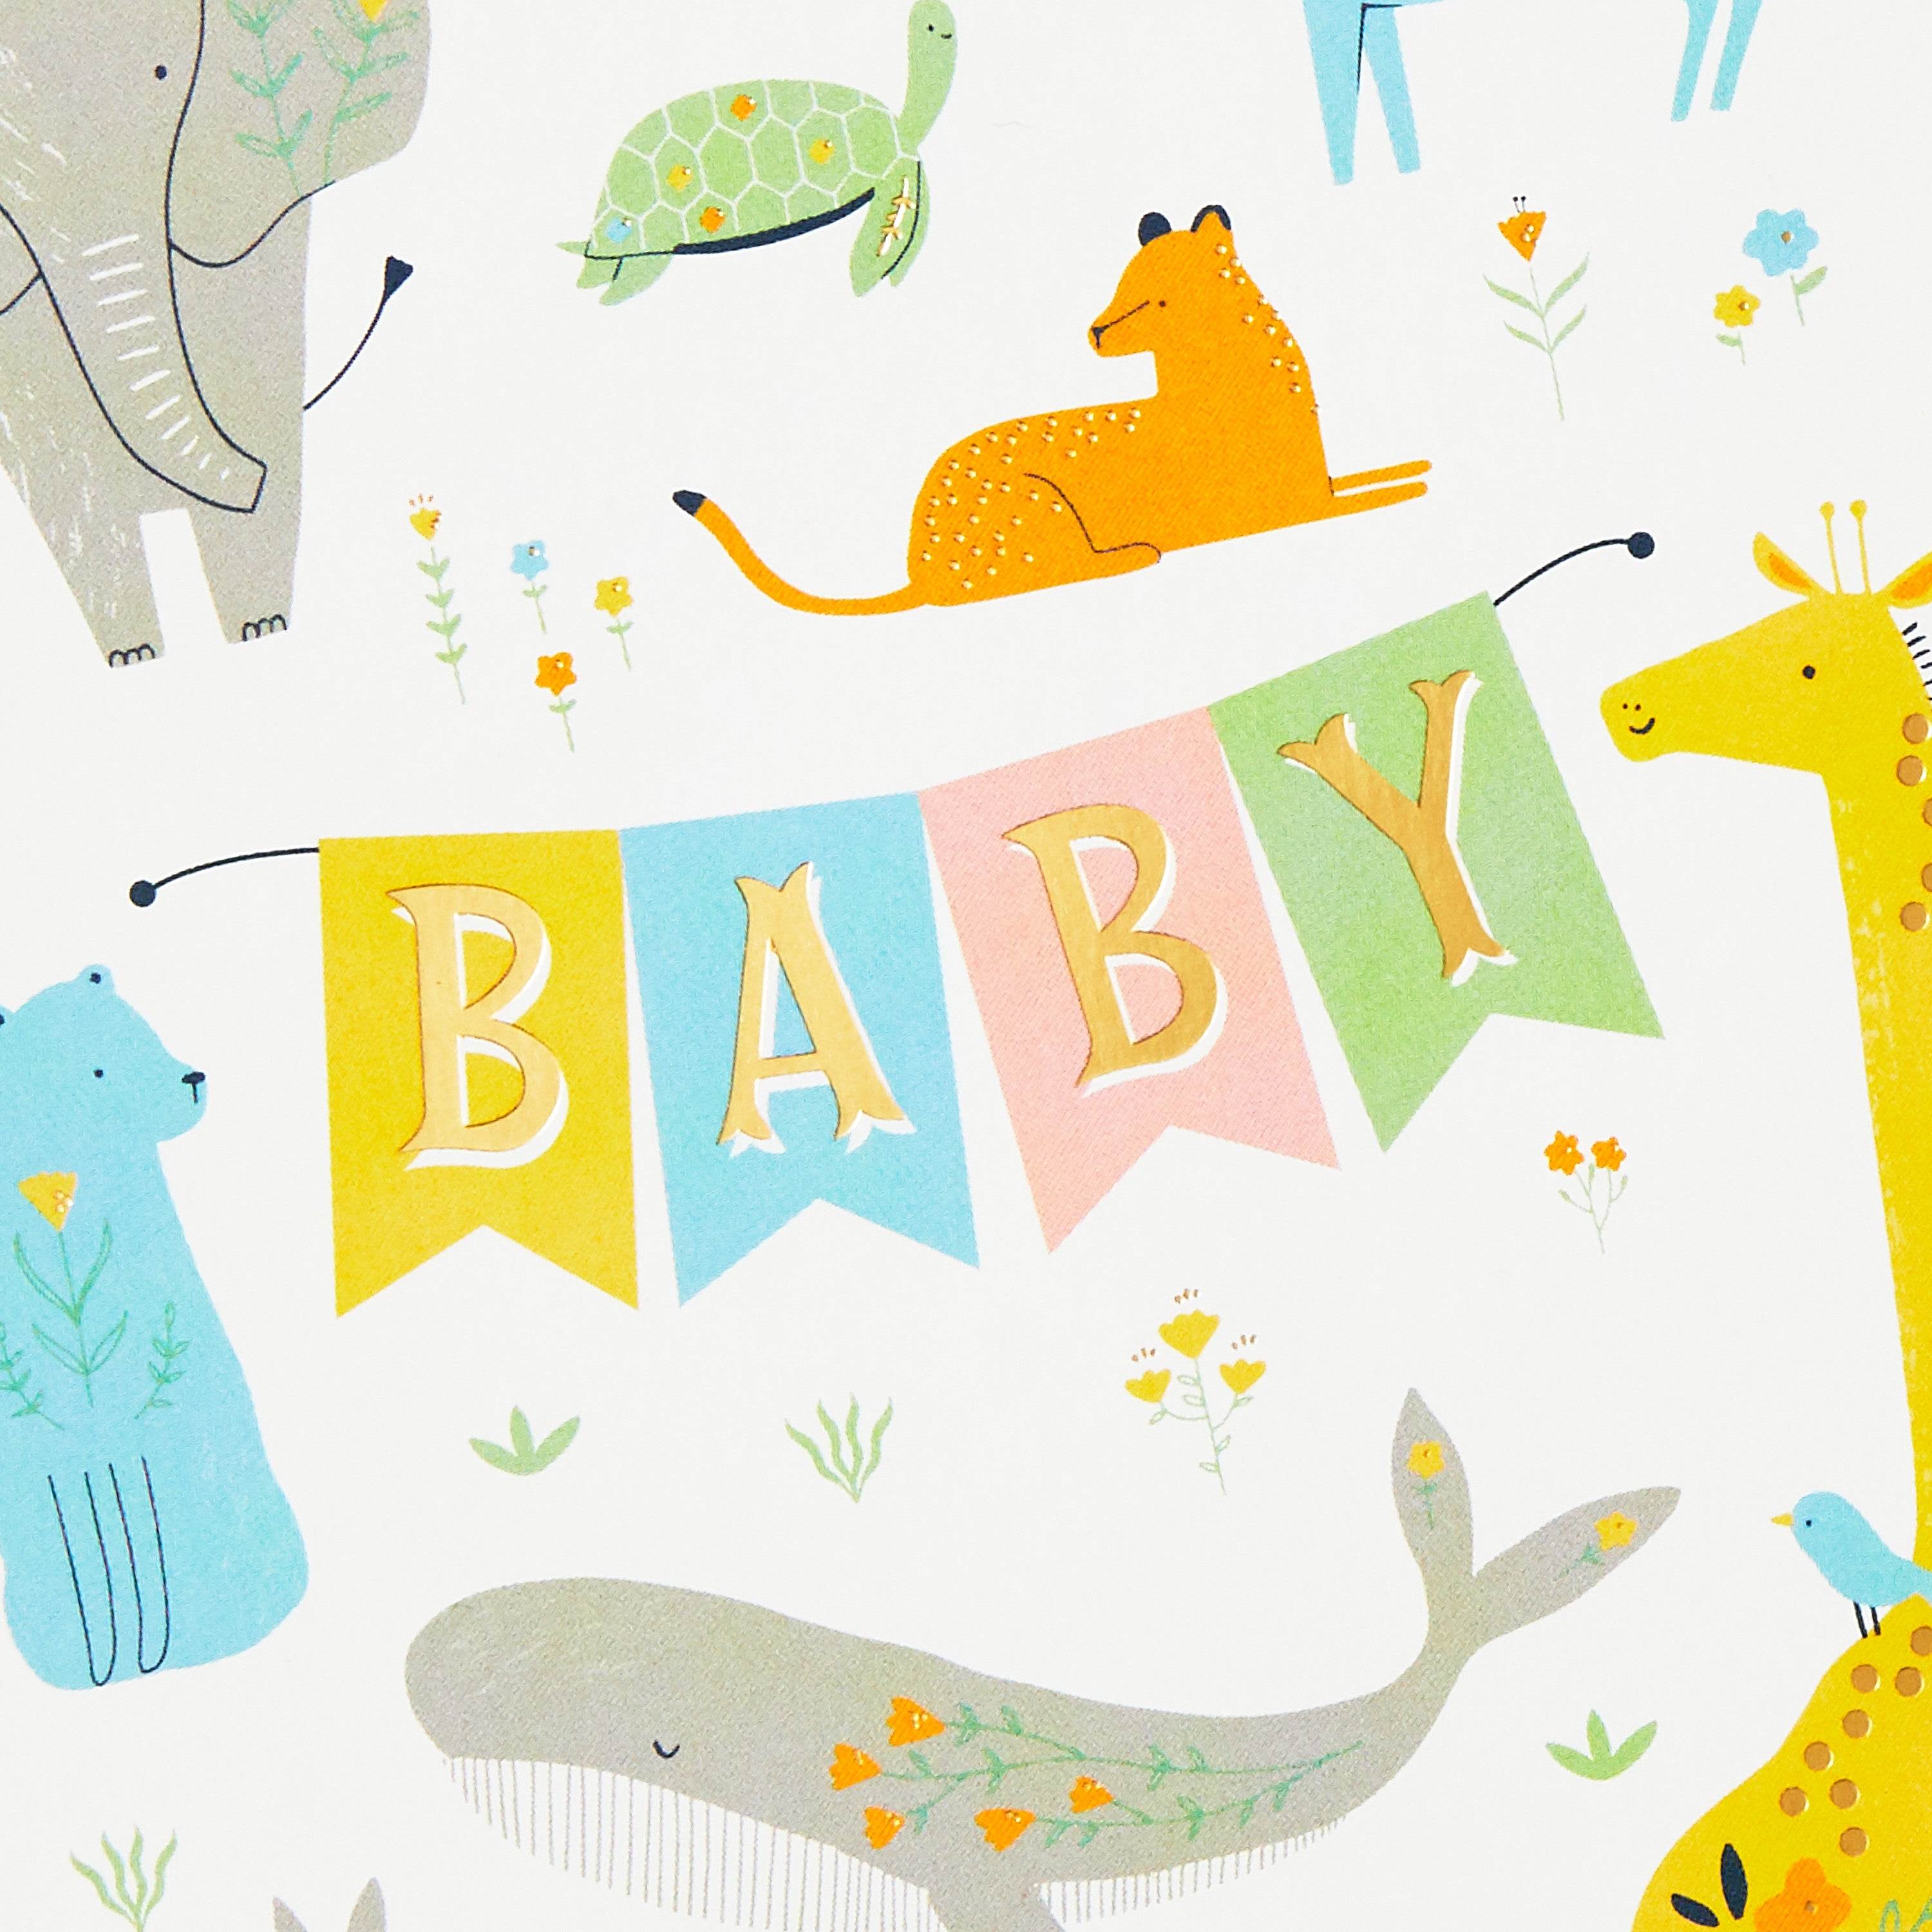 Baby Shower Cards Assortment, 12 Cards with Envelopes (Rabbits, Animals, Baby Boys, Baby Girls)